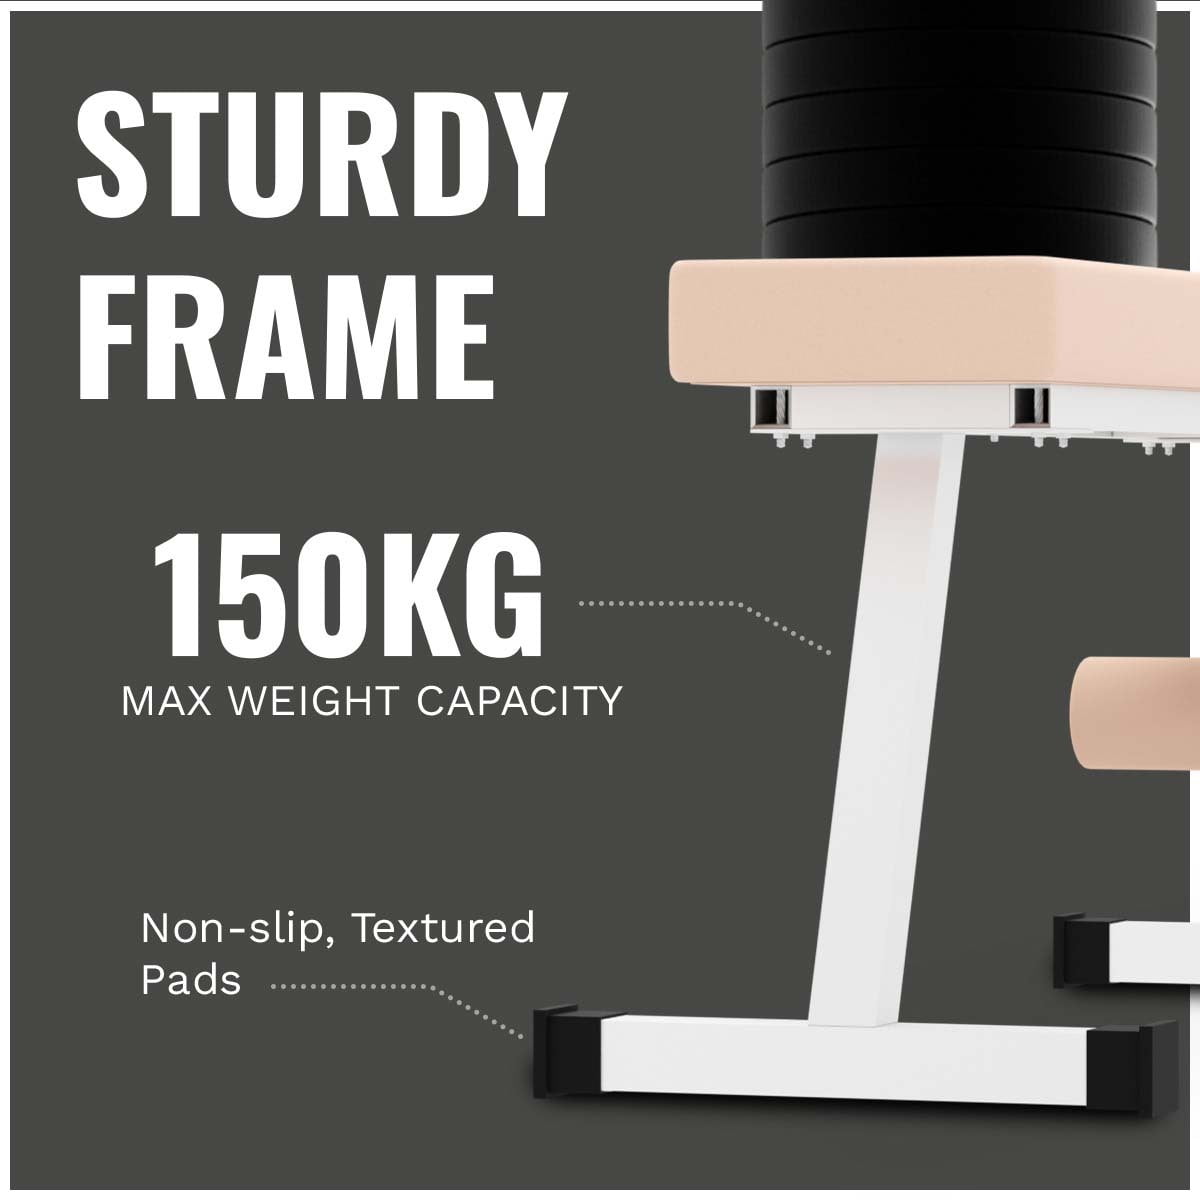 Durafit Simple Flat Bench SB01 with Max User Weight of 150kg